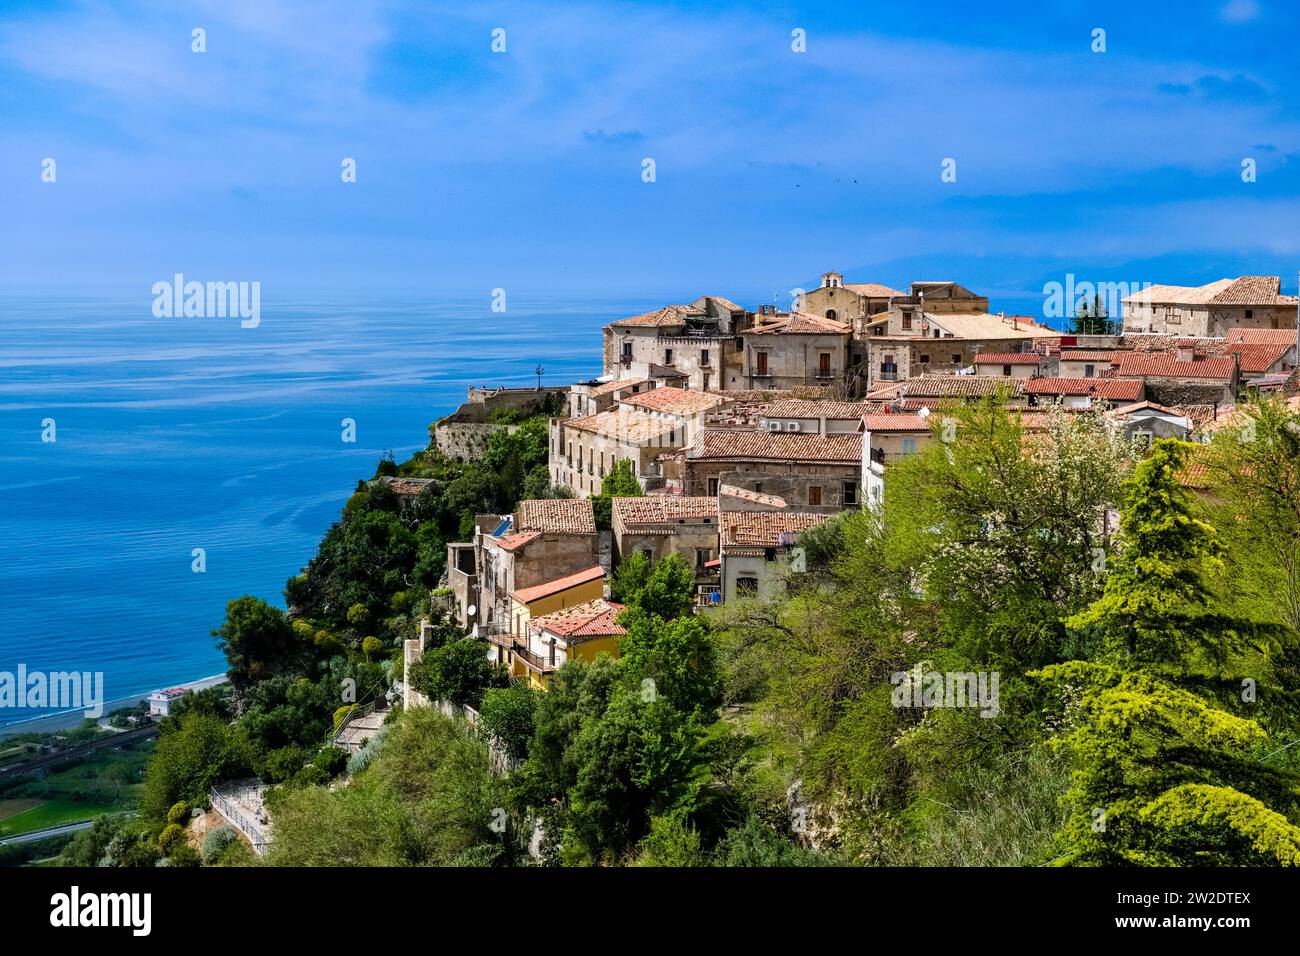 Houses of the small town of Fiumefreddo Bruzio, which lies on a rocky cliff overlooking the Mediterranean sea. Stock Photo